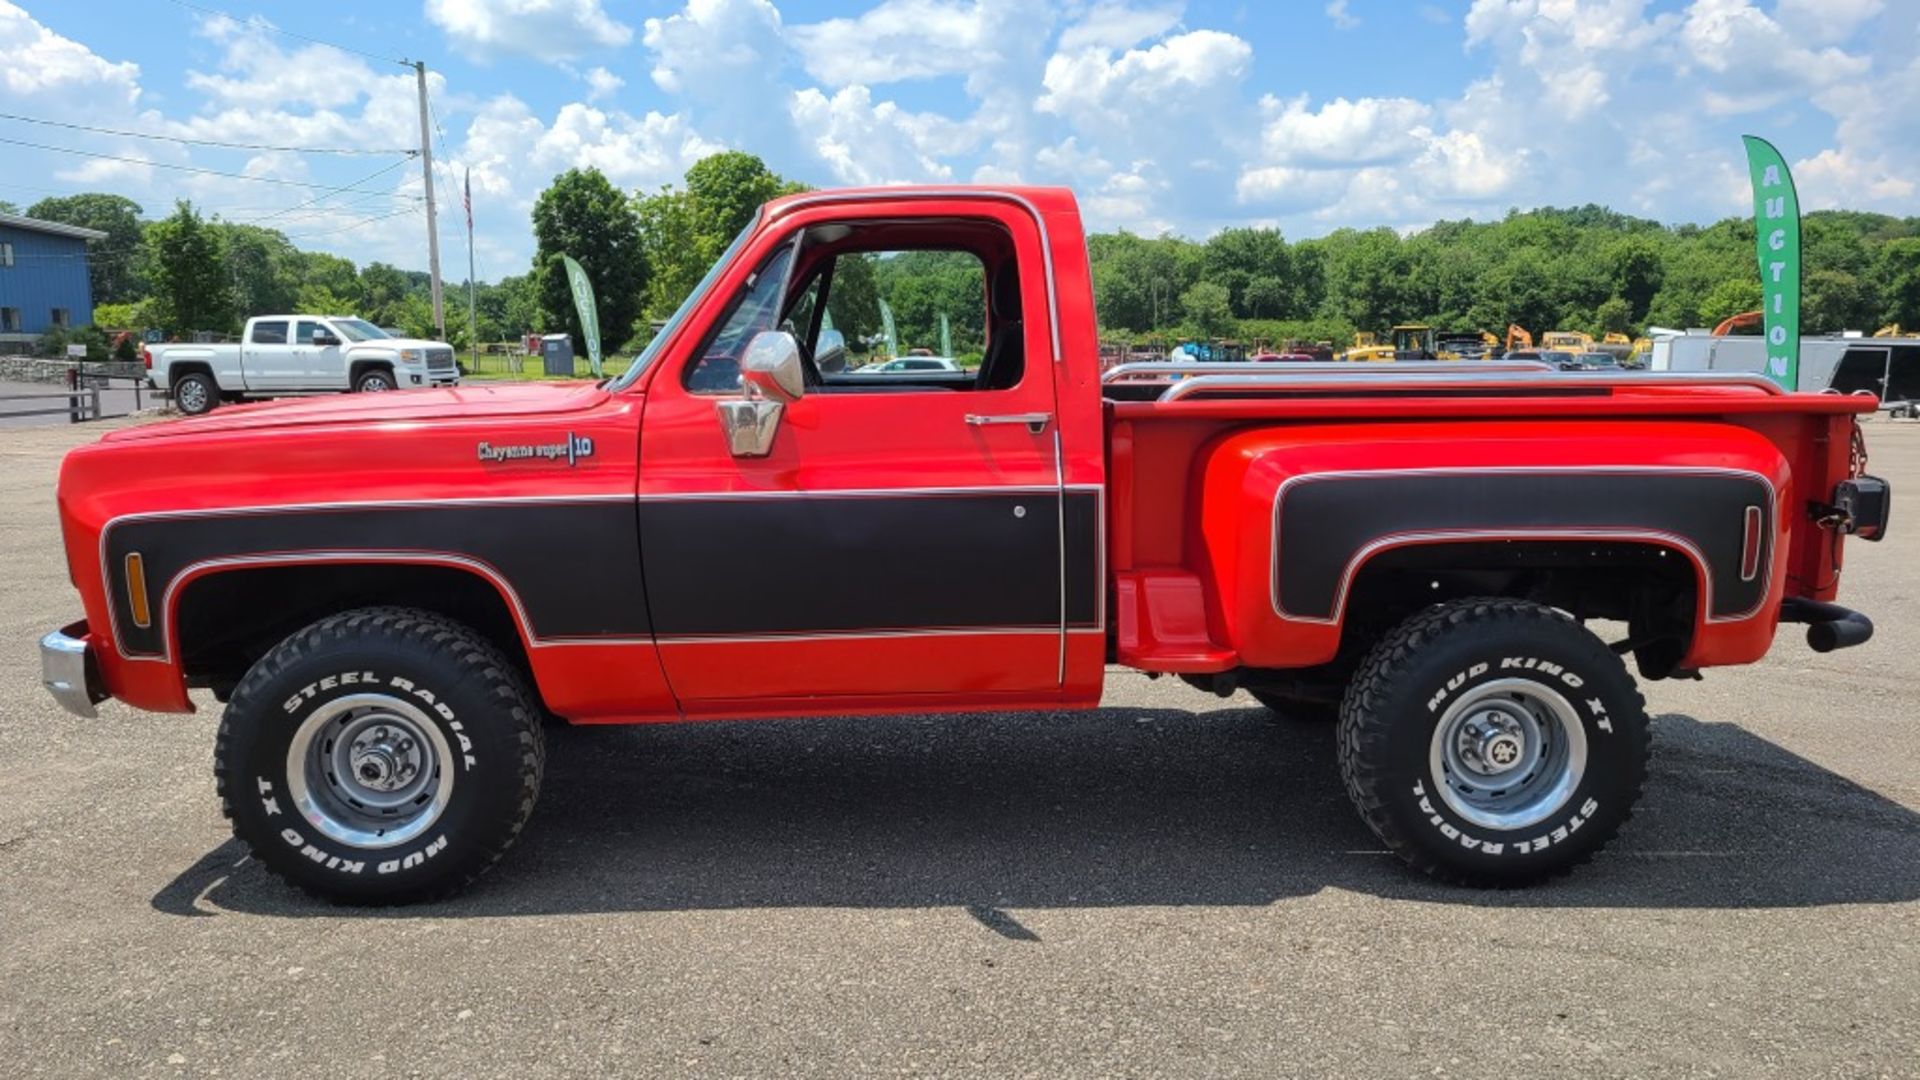 1977 Chevy K10 Pickup - Image 4 of 13